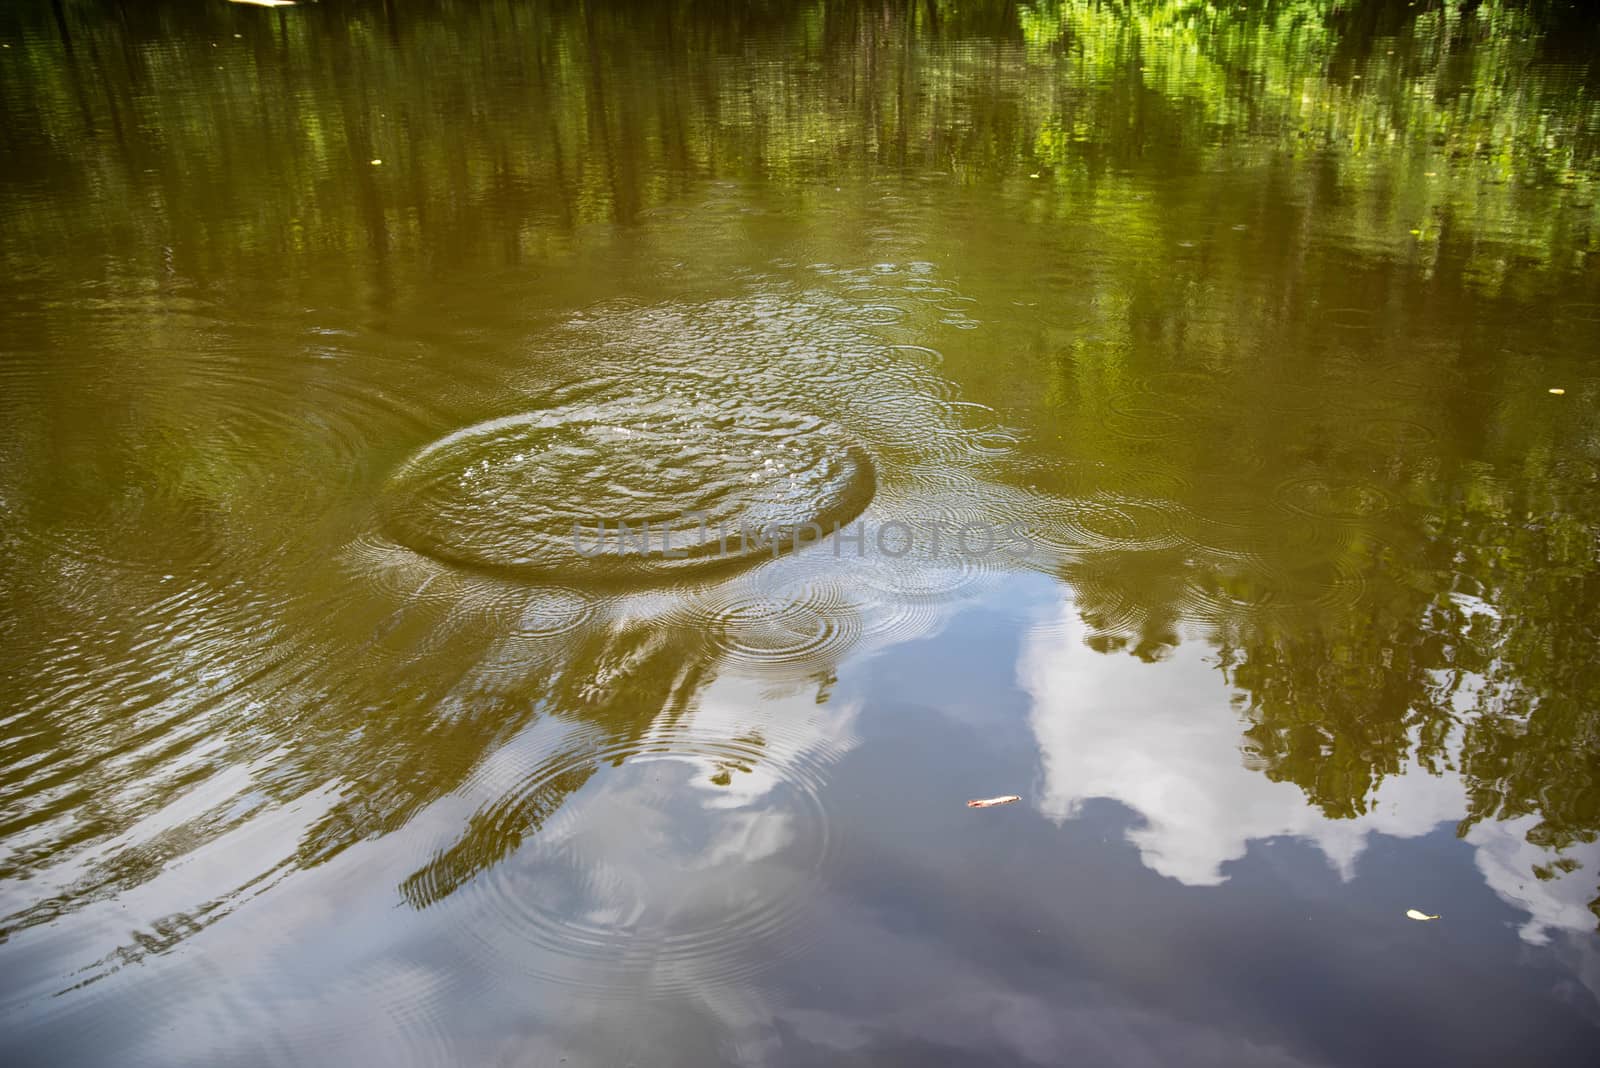 Full frame image of a forst pond reflecting a big blue sky with white clouds and woodland surroundings marred by a disturbance that forms ripples, breaking the smoth image.